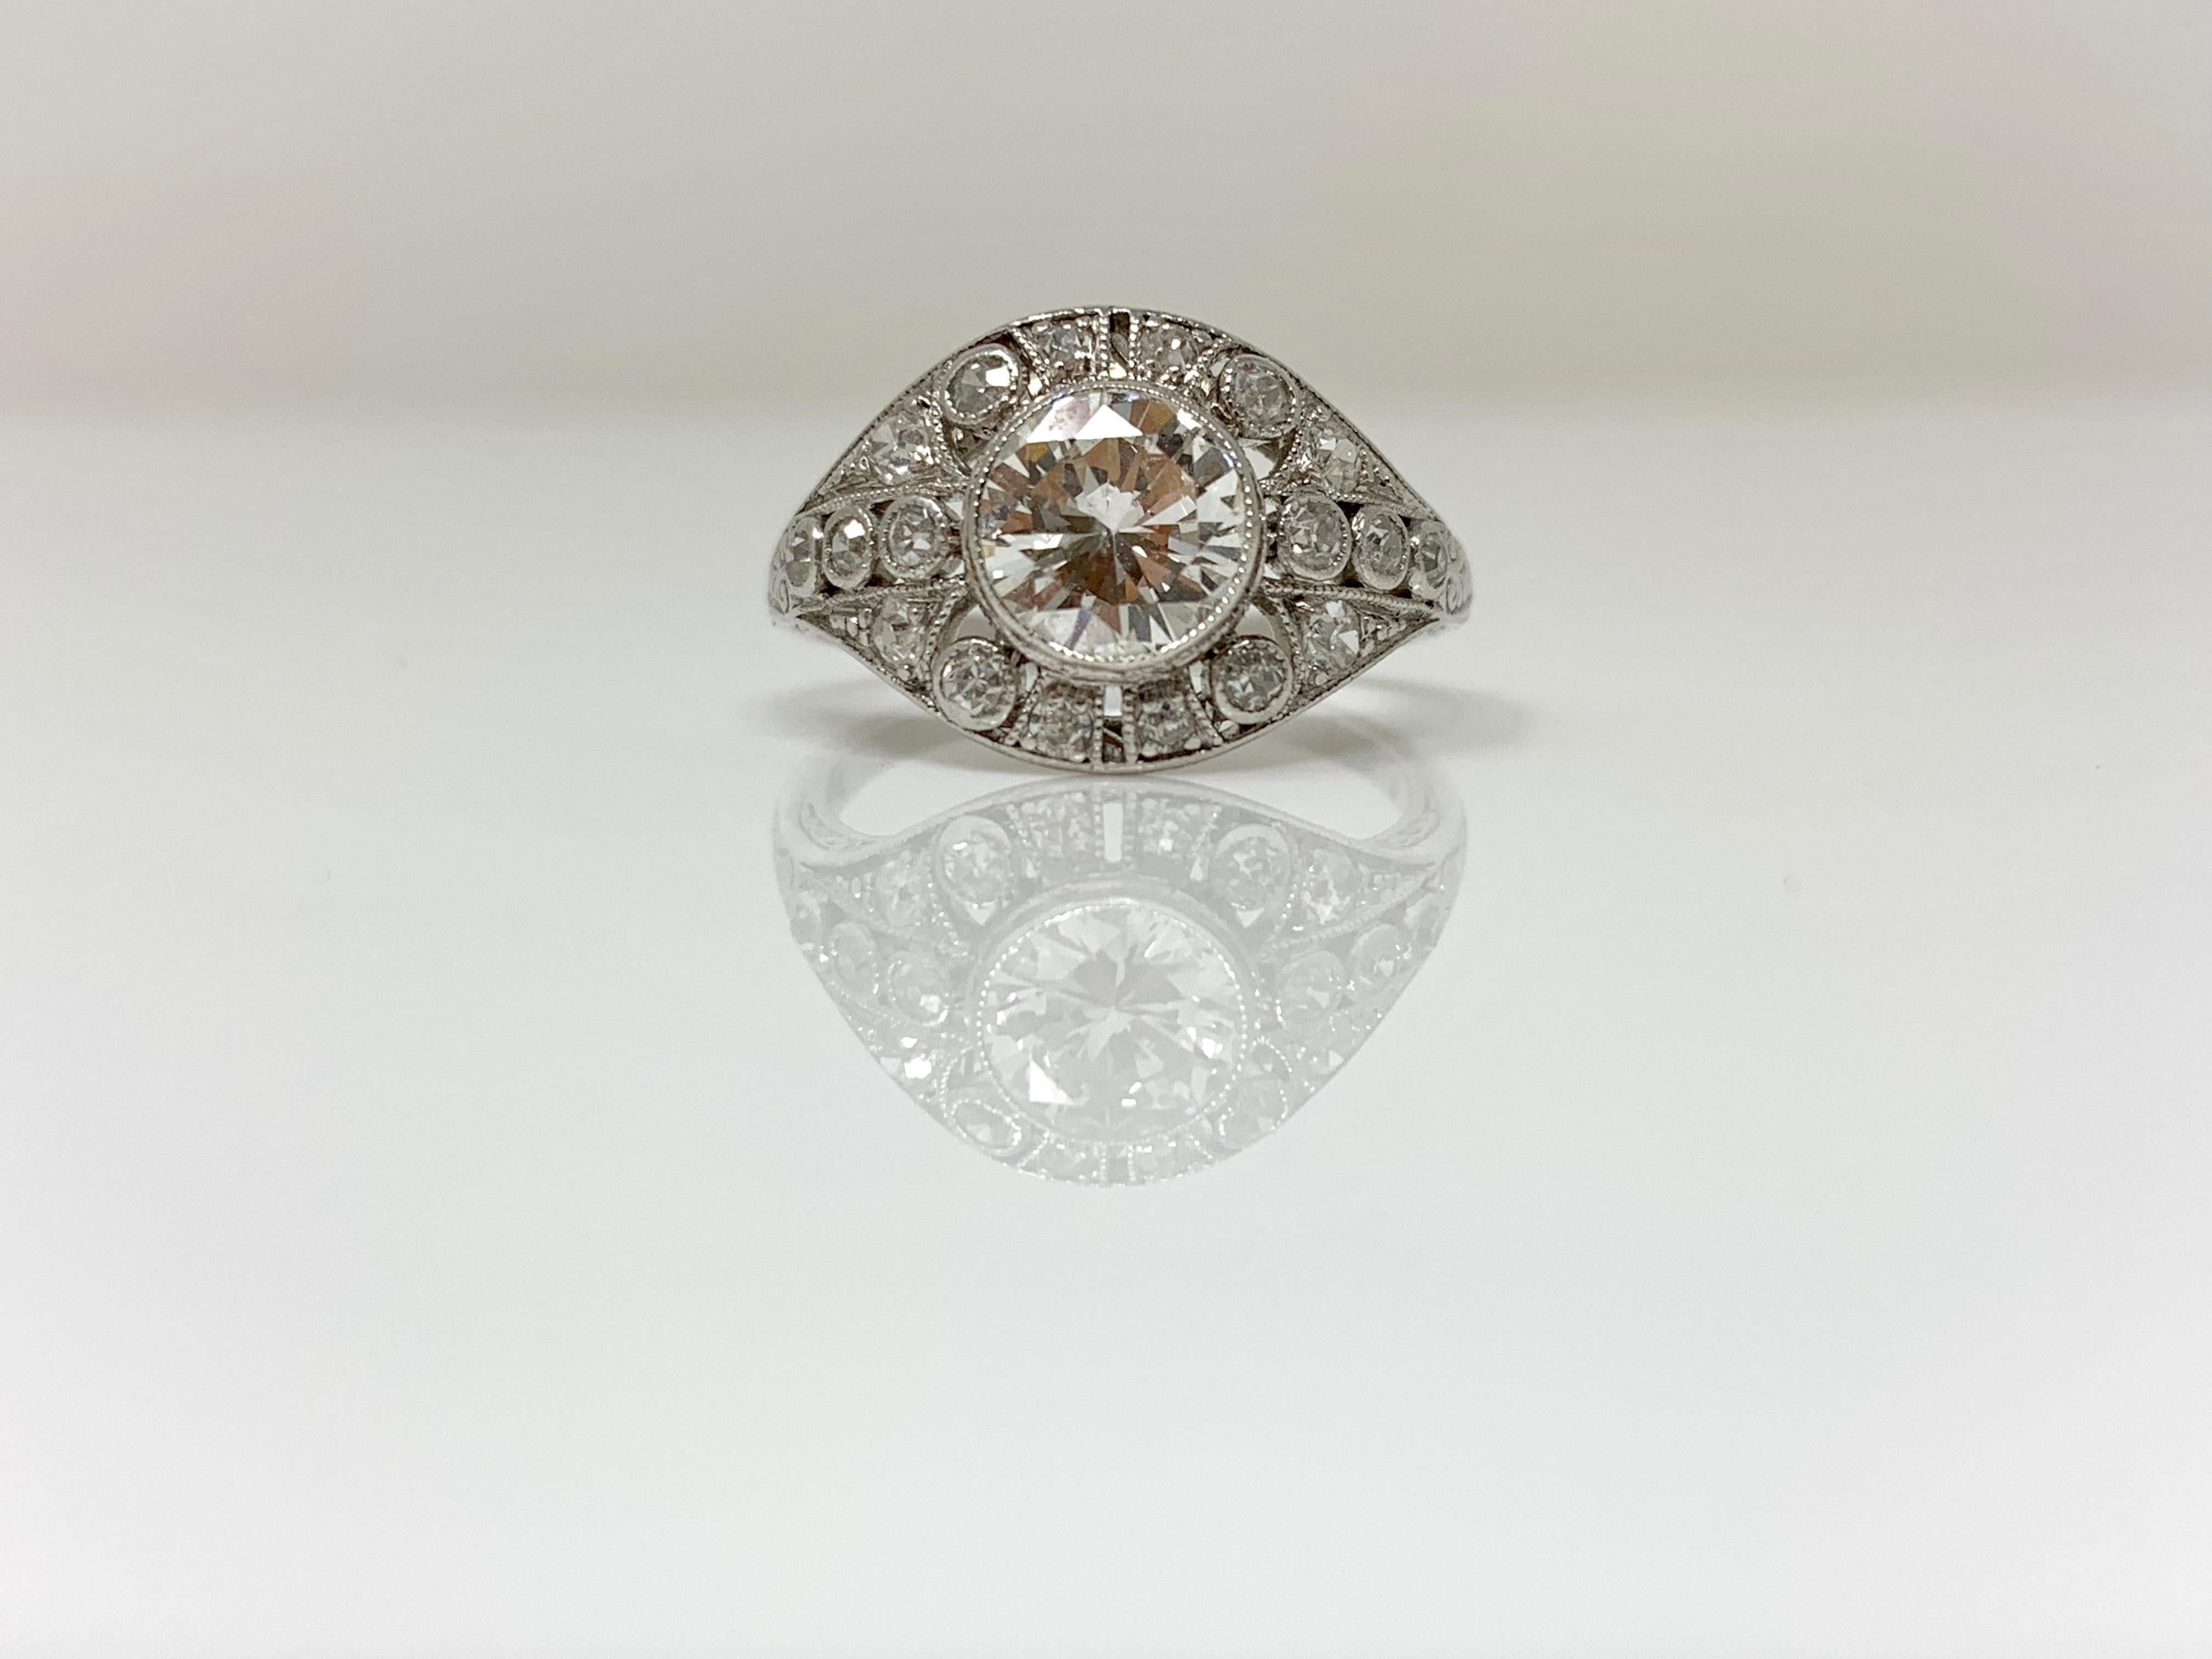 1920 Antique White Old European Cut Diamond Engagement Ring in Platinum In Excellent Condition For Sale In New York, NY